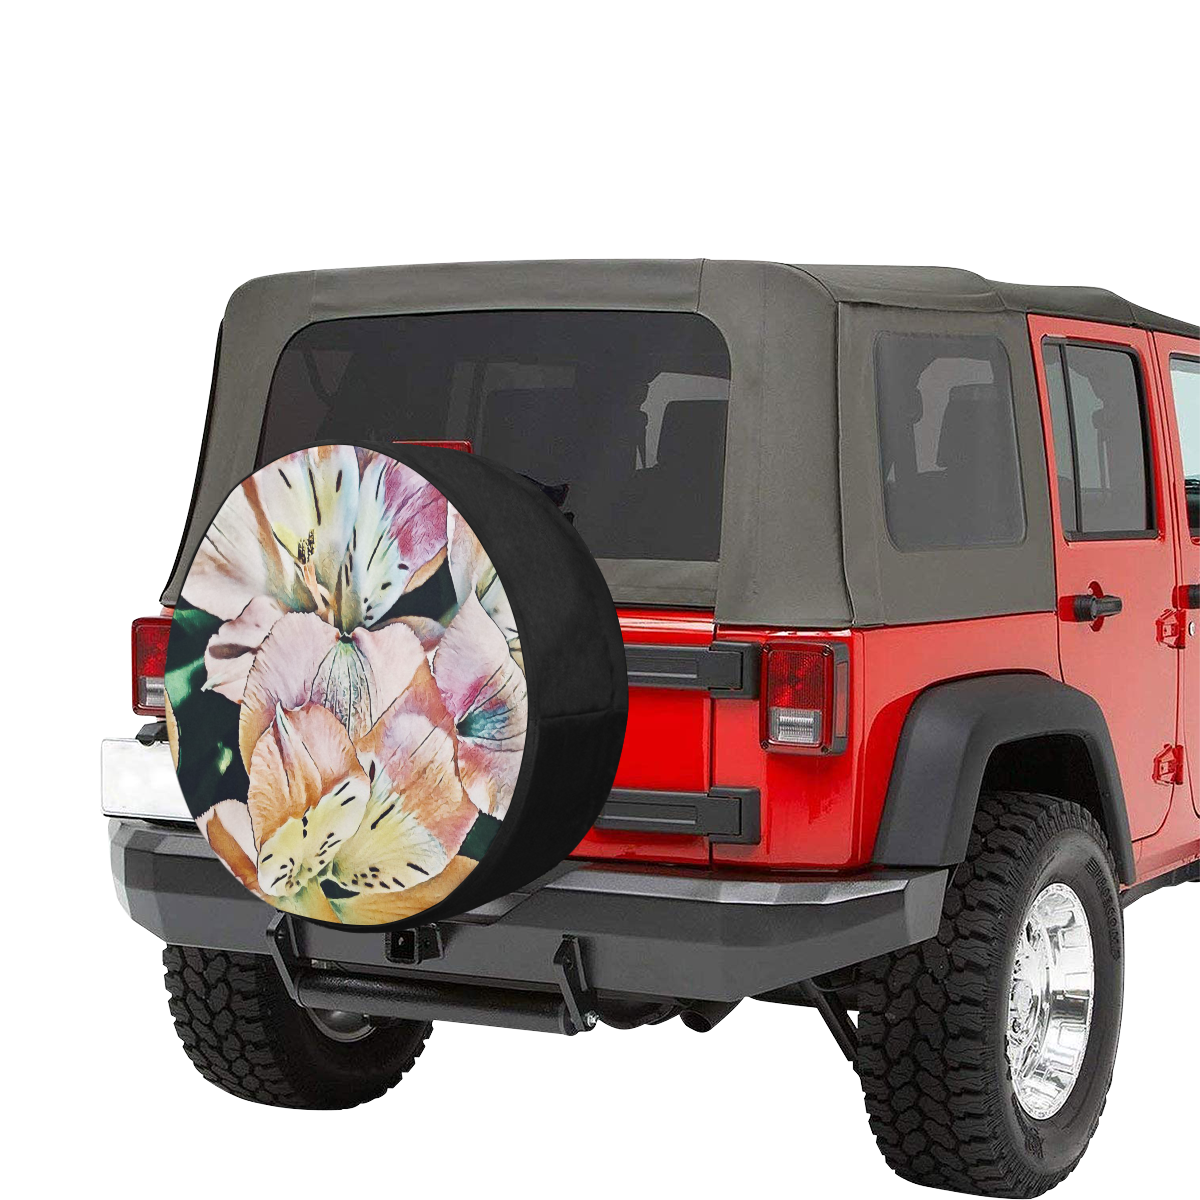 Impression Floral 10192 by JamColors 34 Inch Spare Tire Cover